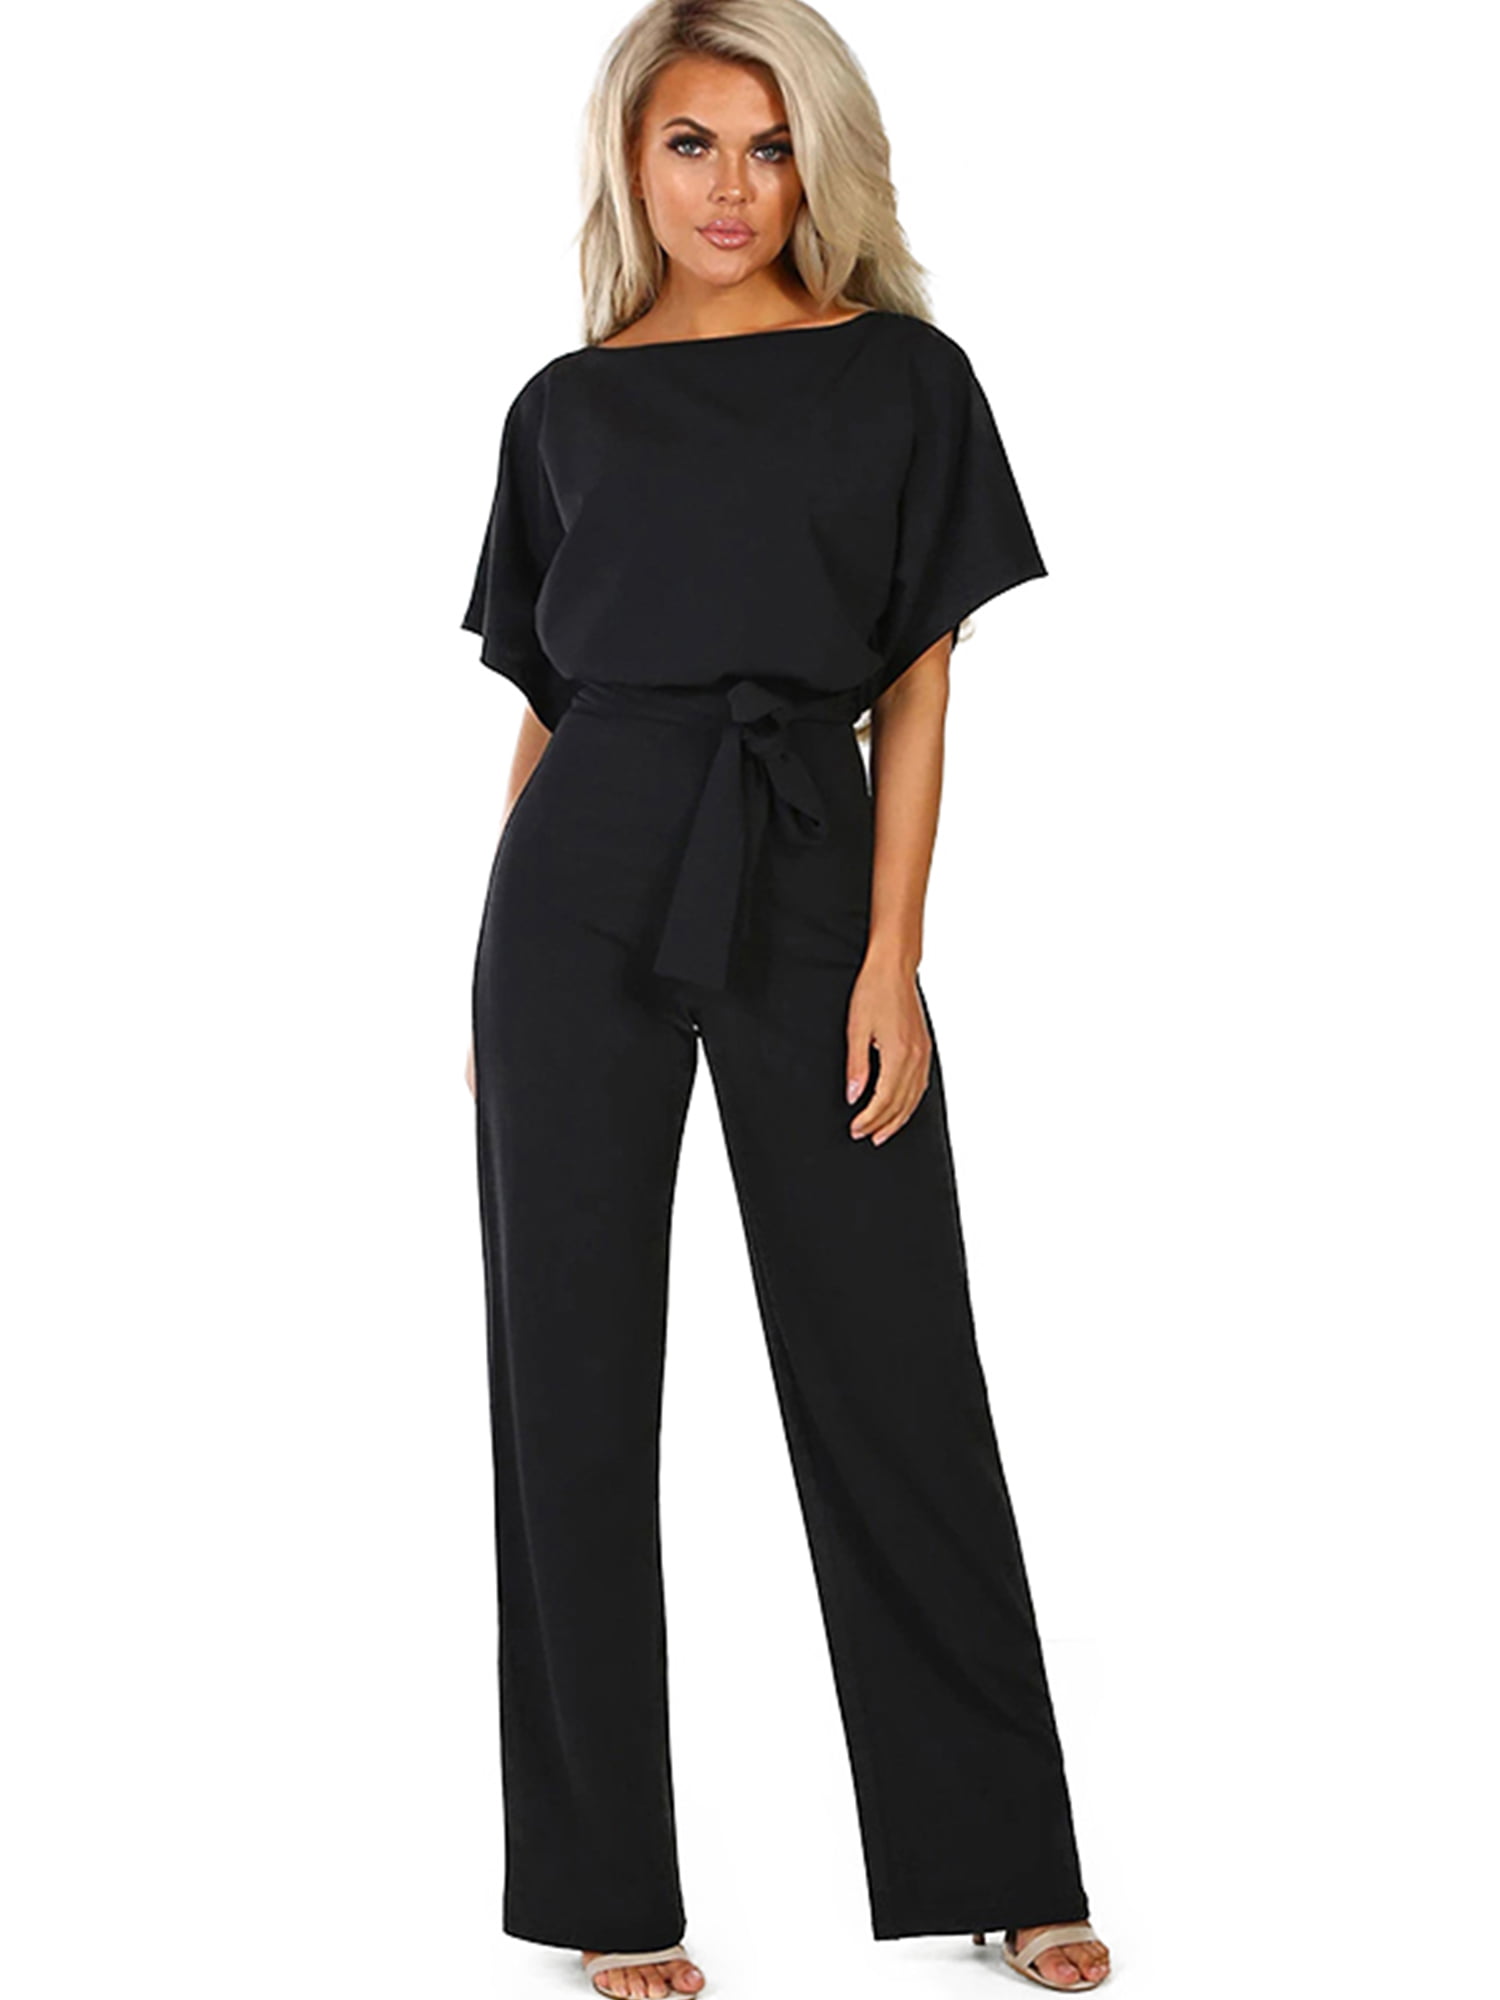 Dowager Women Casual Loose Short Sleeve Belted Wide Leg Pant Romper Jumpsuit Elegant Solid Color Party Jumpsuits Clubwear 